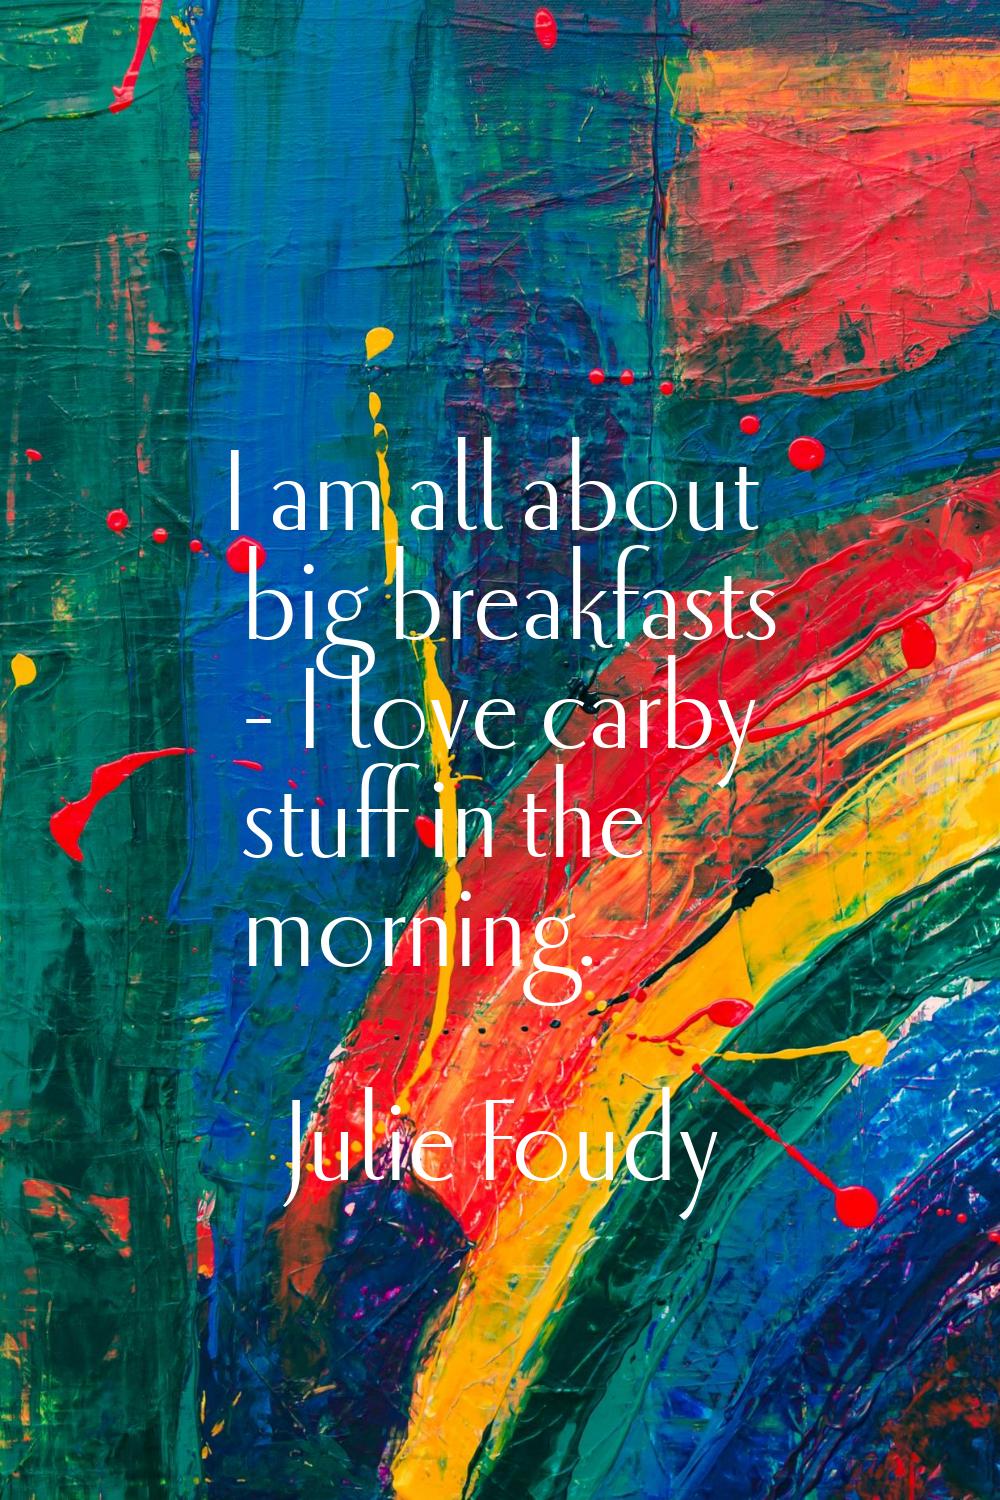 I am all about big breakfasts - I love carby stuff in the morning.